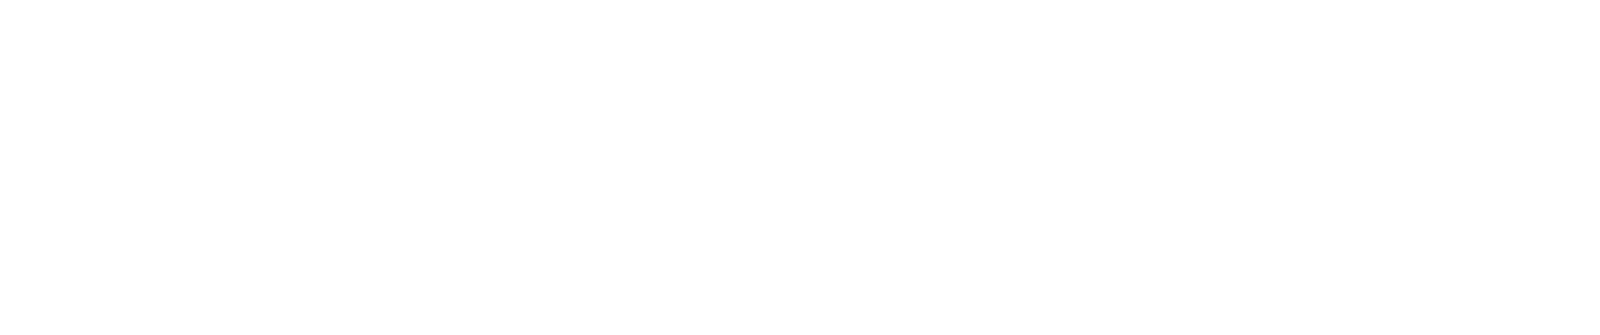 2012 Tribal Directed By Tom Gallus